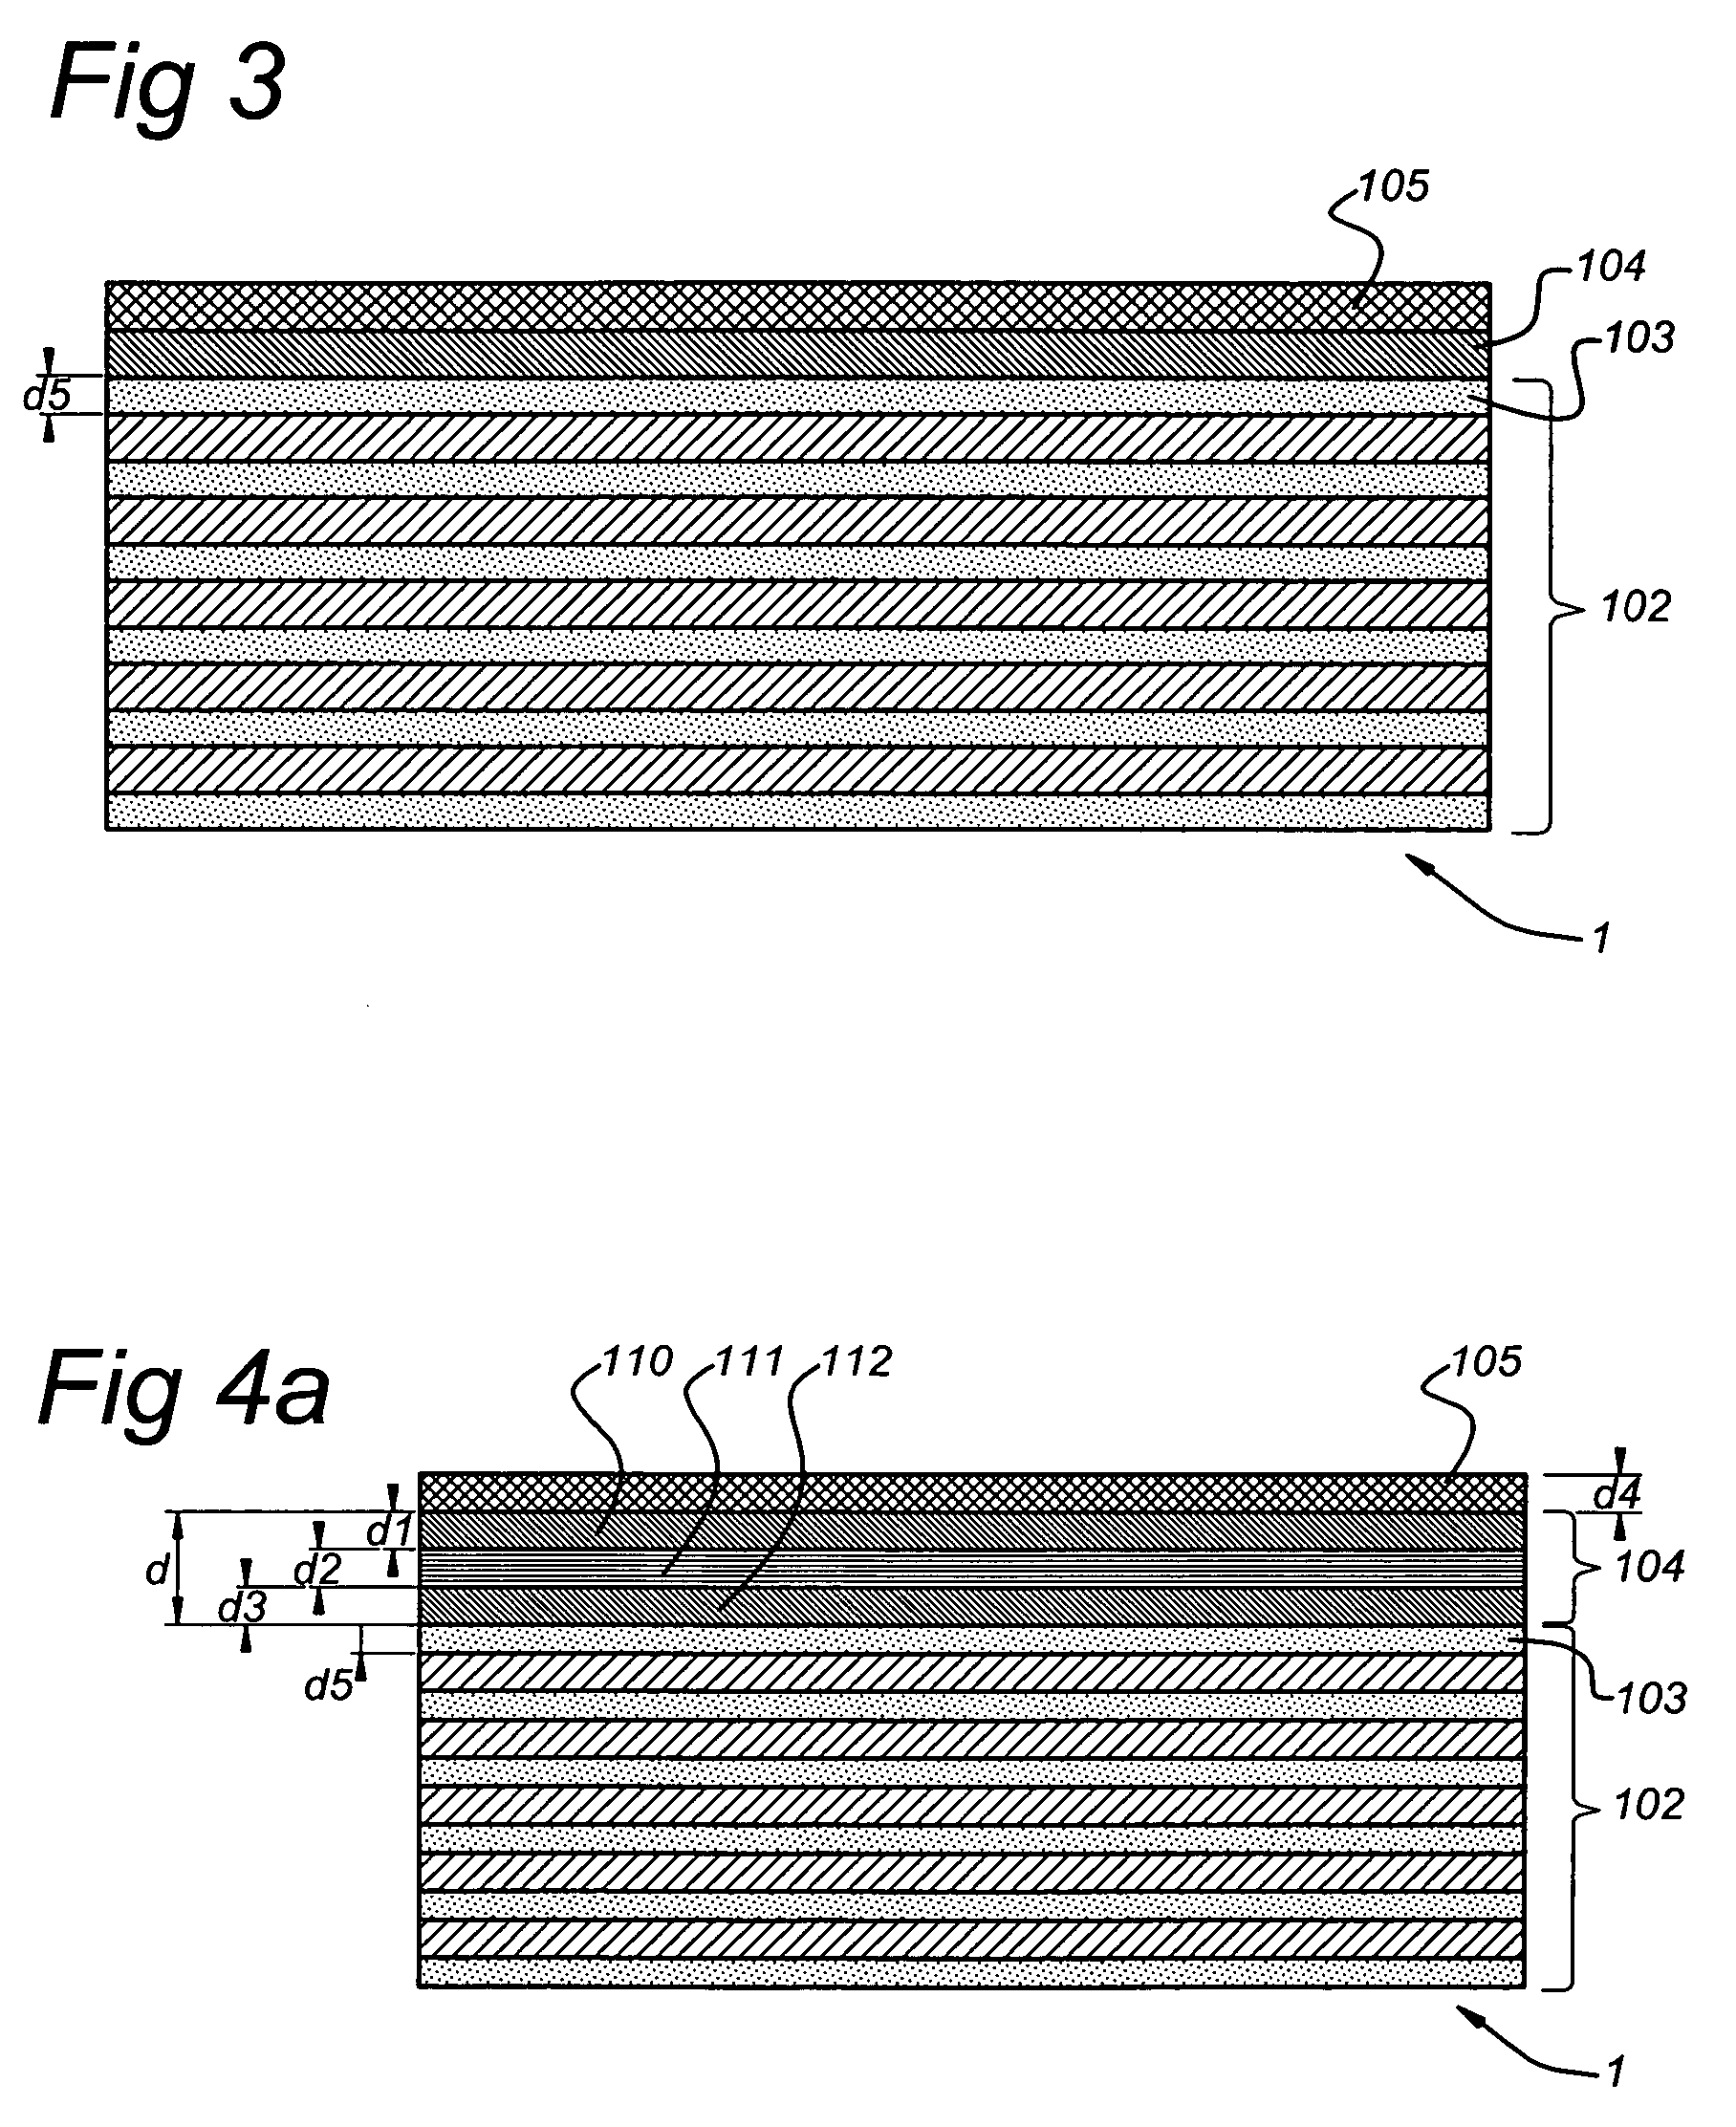 Spectral purity filter for multi-layer mirror, lithographic apparatus including such multi-layer mirror, method for enlarging the ratio of desired radiation and undesired radiation, and device manufacturing method